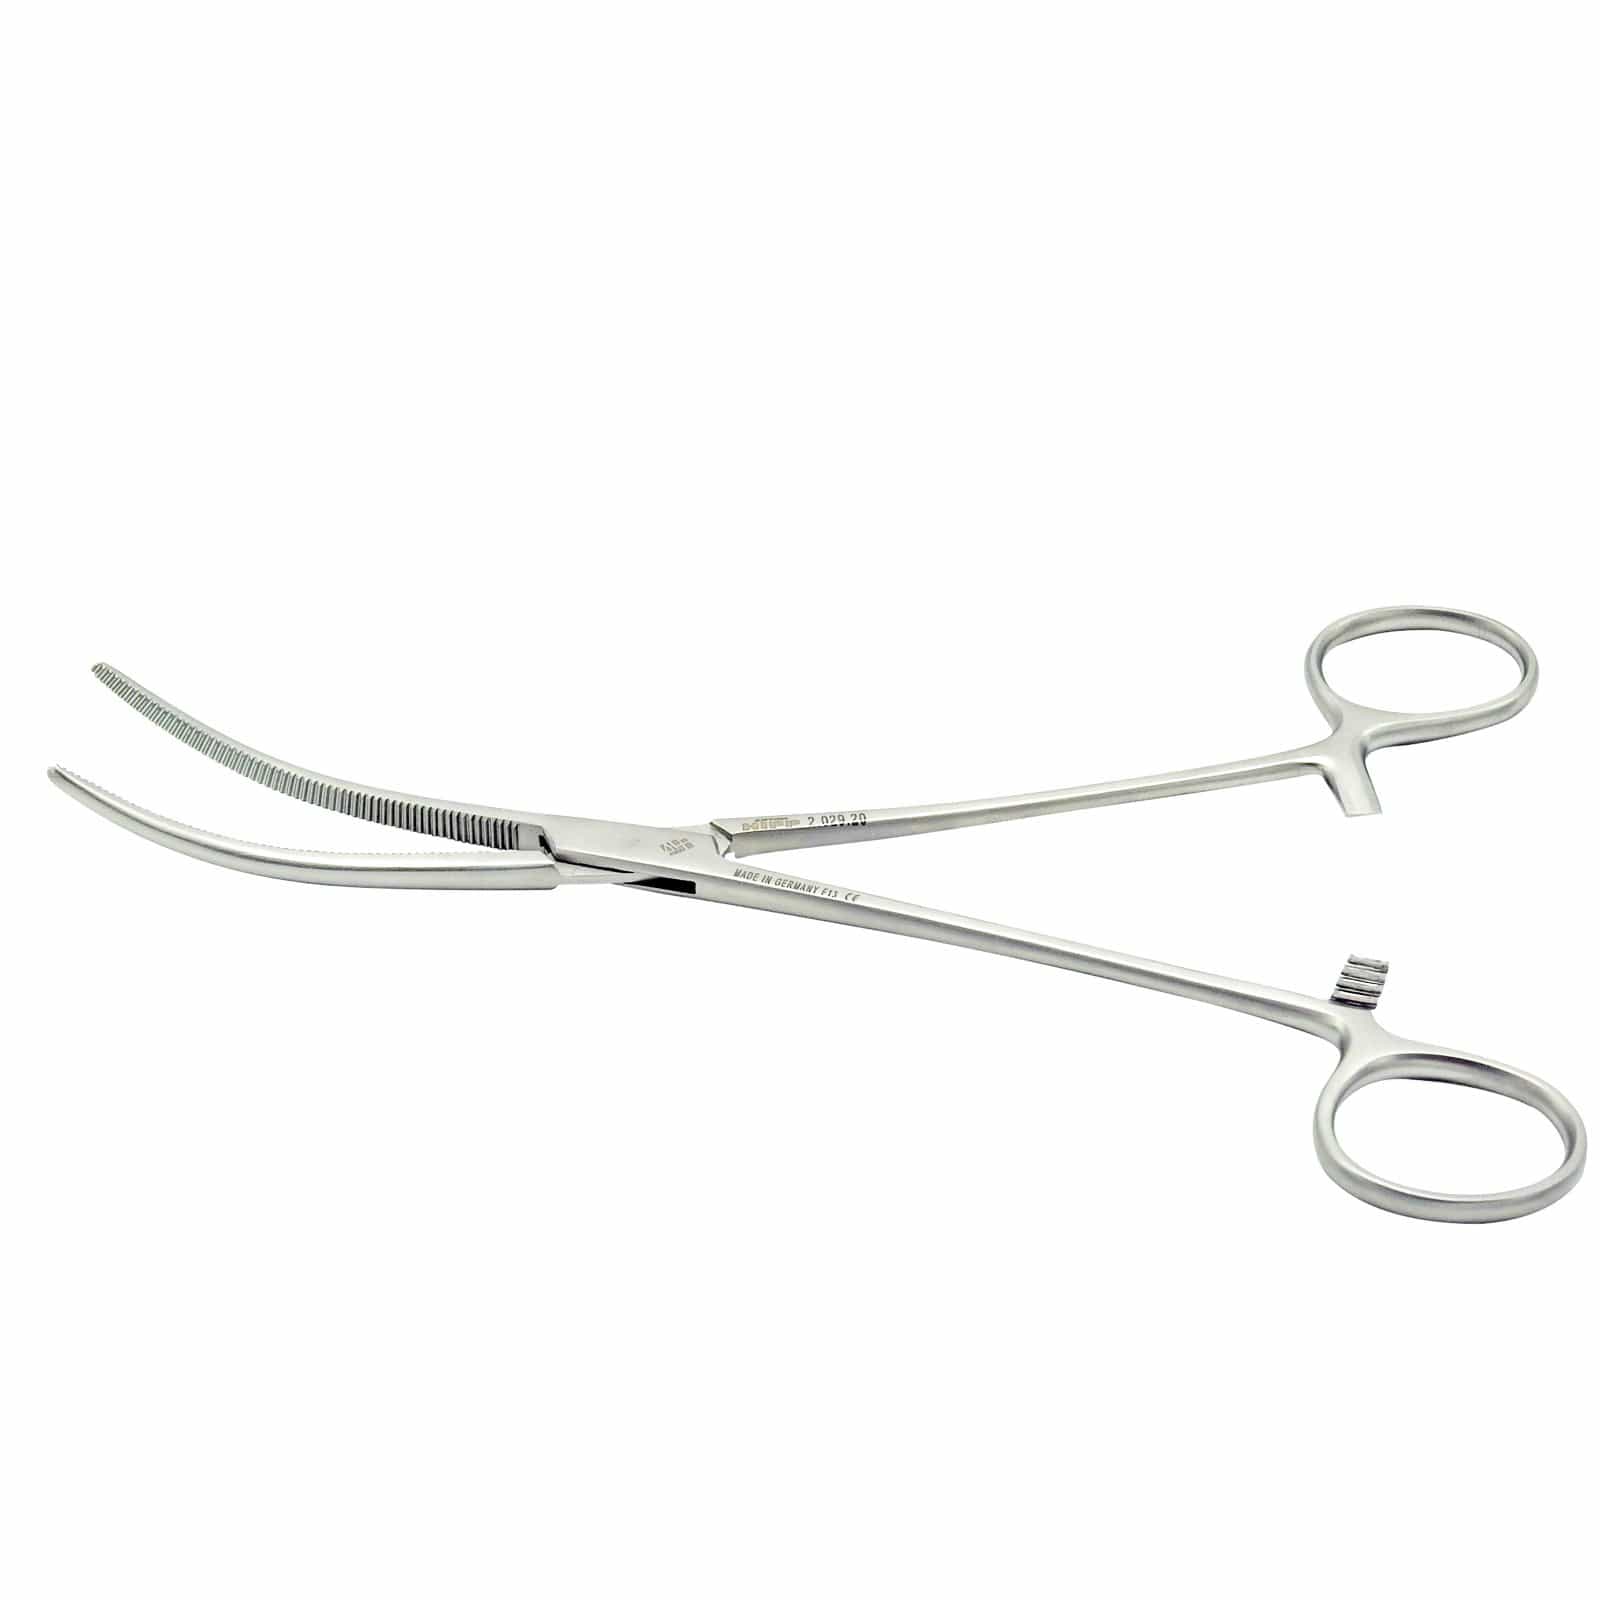 Hipp Surgical Instruments 20cm / Curved Hipp Rochester Pean Forceps